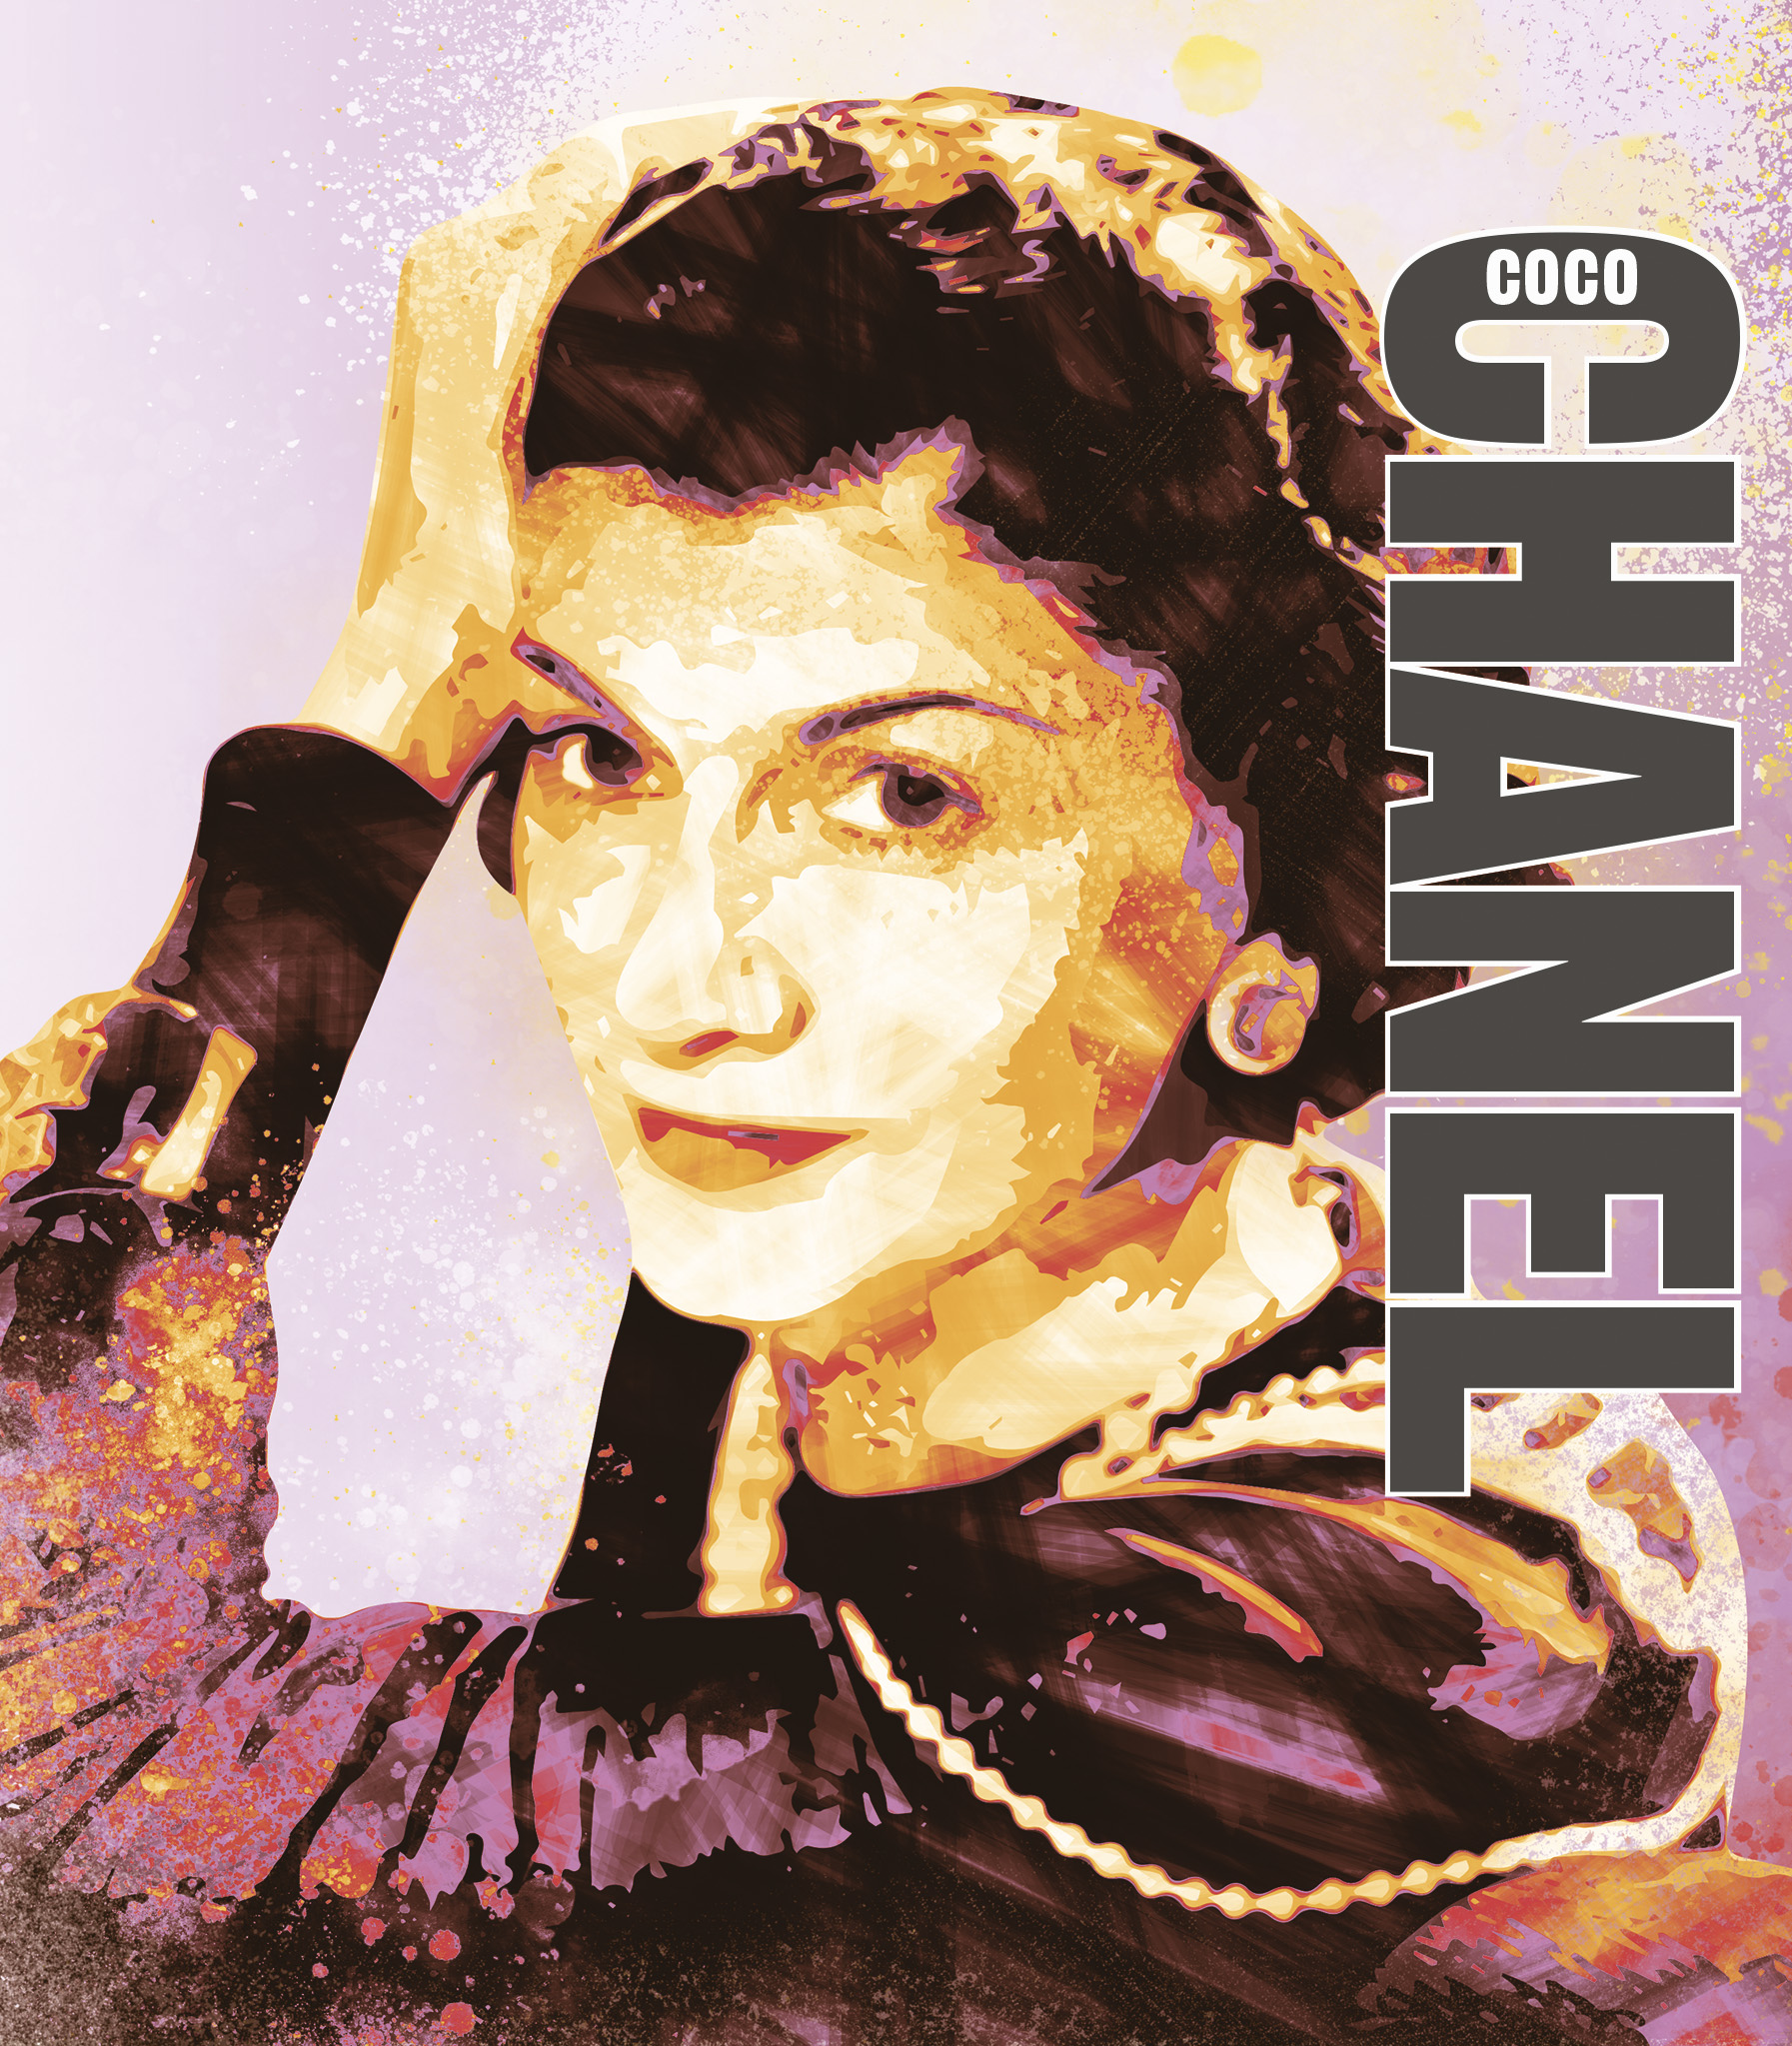 Coco Chanel: Biography, Family, Education - Javatpoint